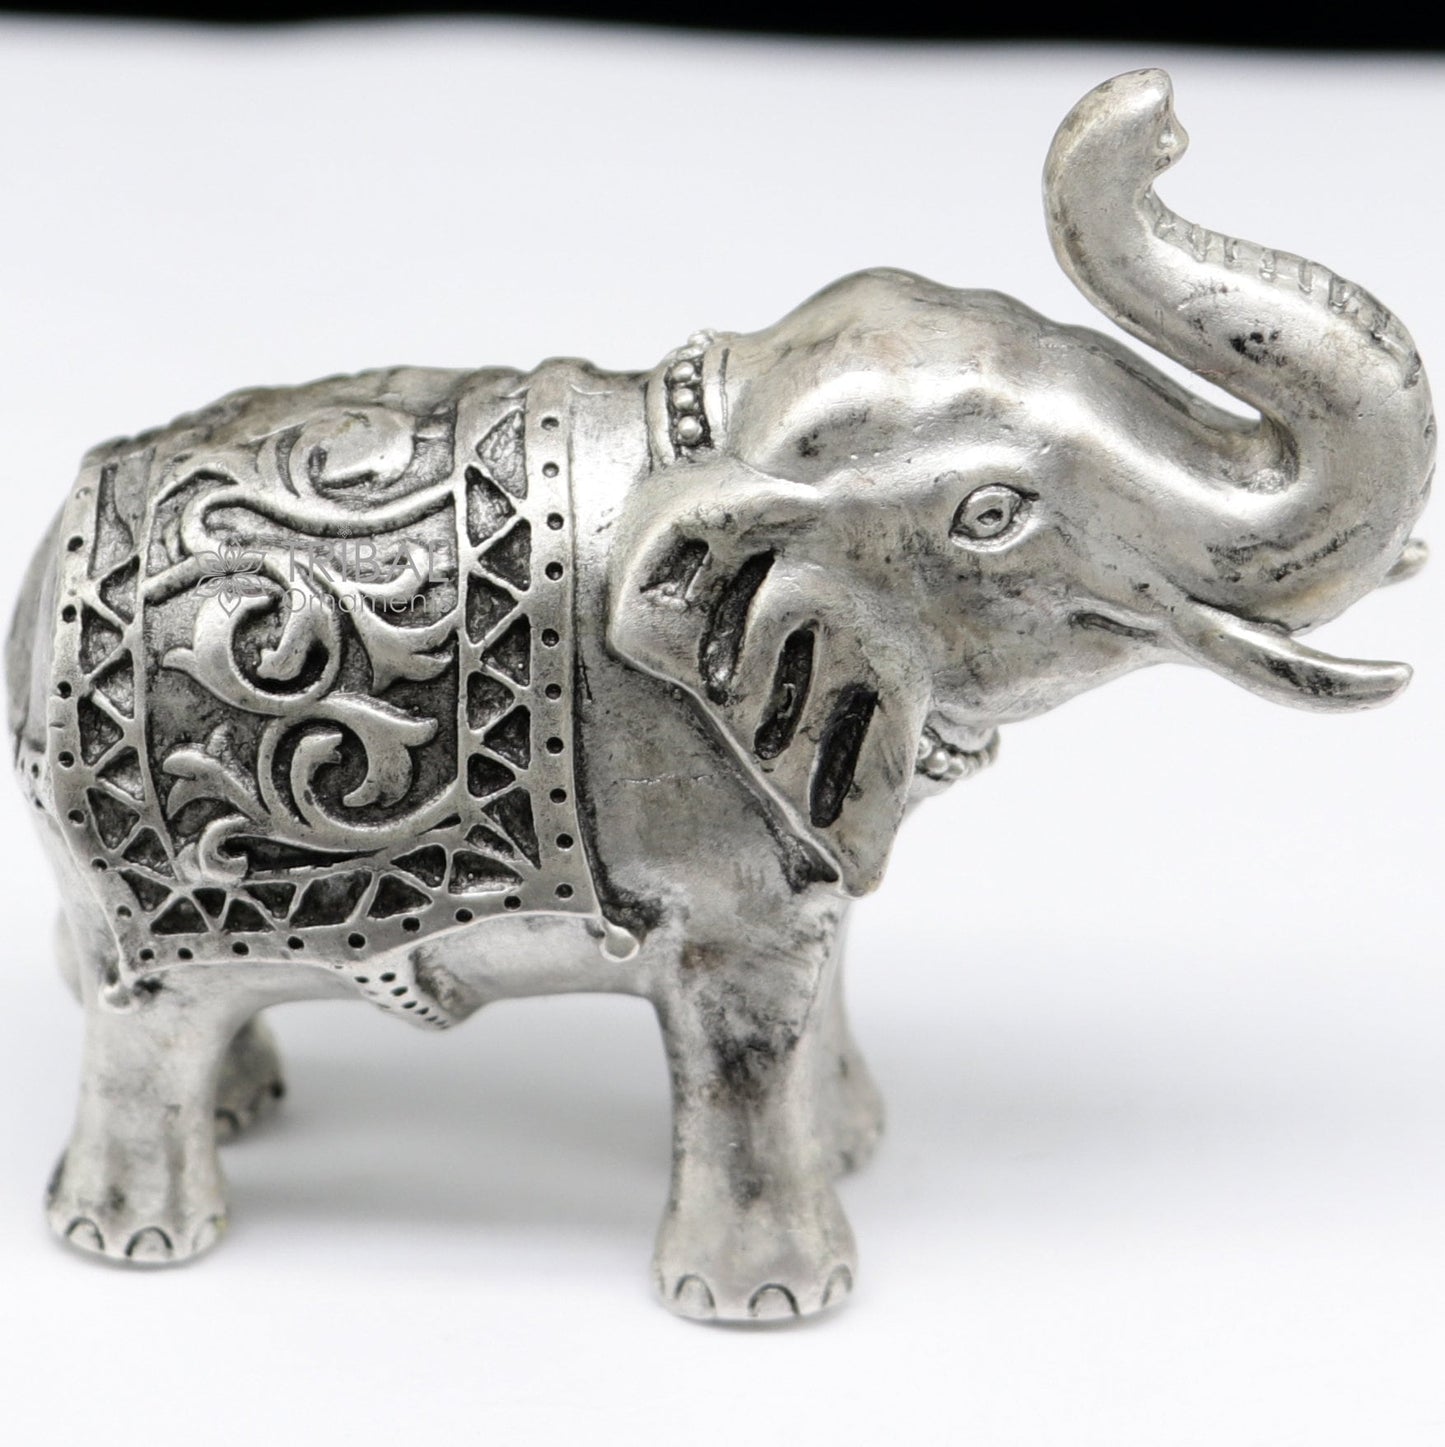 Divine 925 Sterling silver Divine Elephant statues, puja articles figurines, best silver article for your homes wealth and prosperity art660 - TRIBAL ORNAMENTS